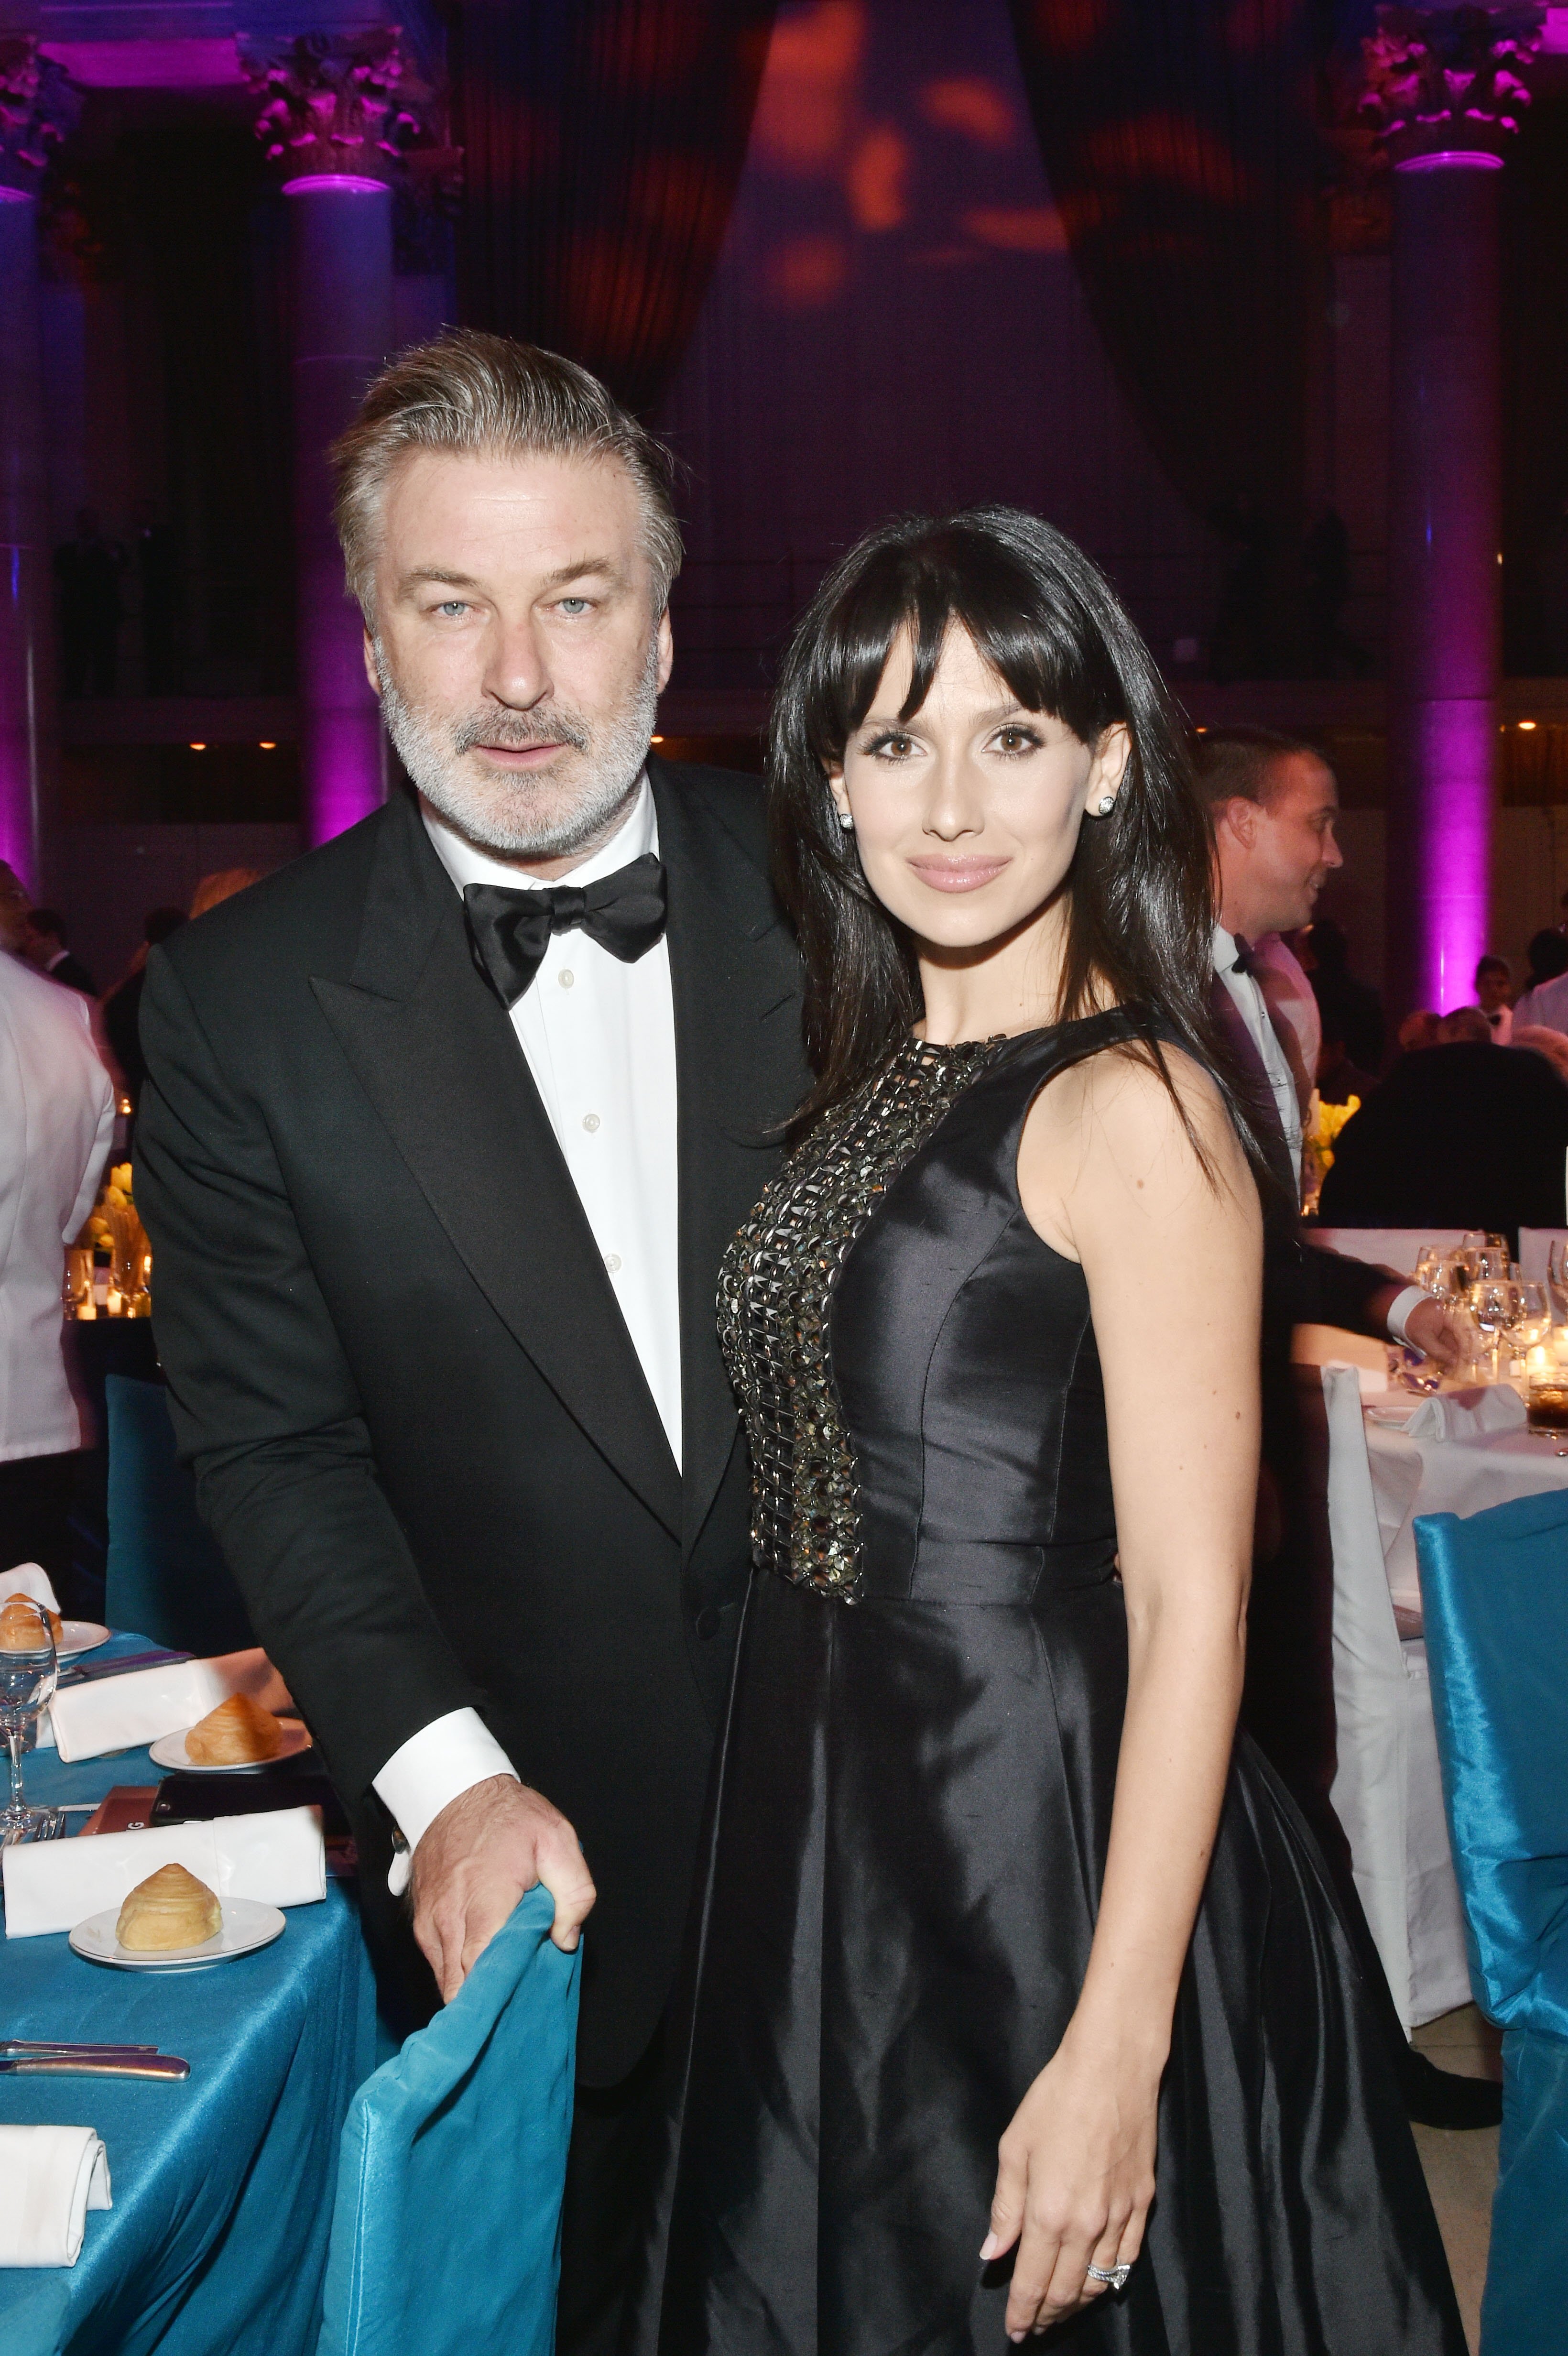 Alec Baldwin (L) and Hilaria Baldwin (R) attend Elton John AIDS Foundation's 14th Annual An Enduring Vision Benefit at Cipriani Wall Street on November 2, 2015, in New York City. | Source: Getty Images.